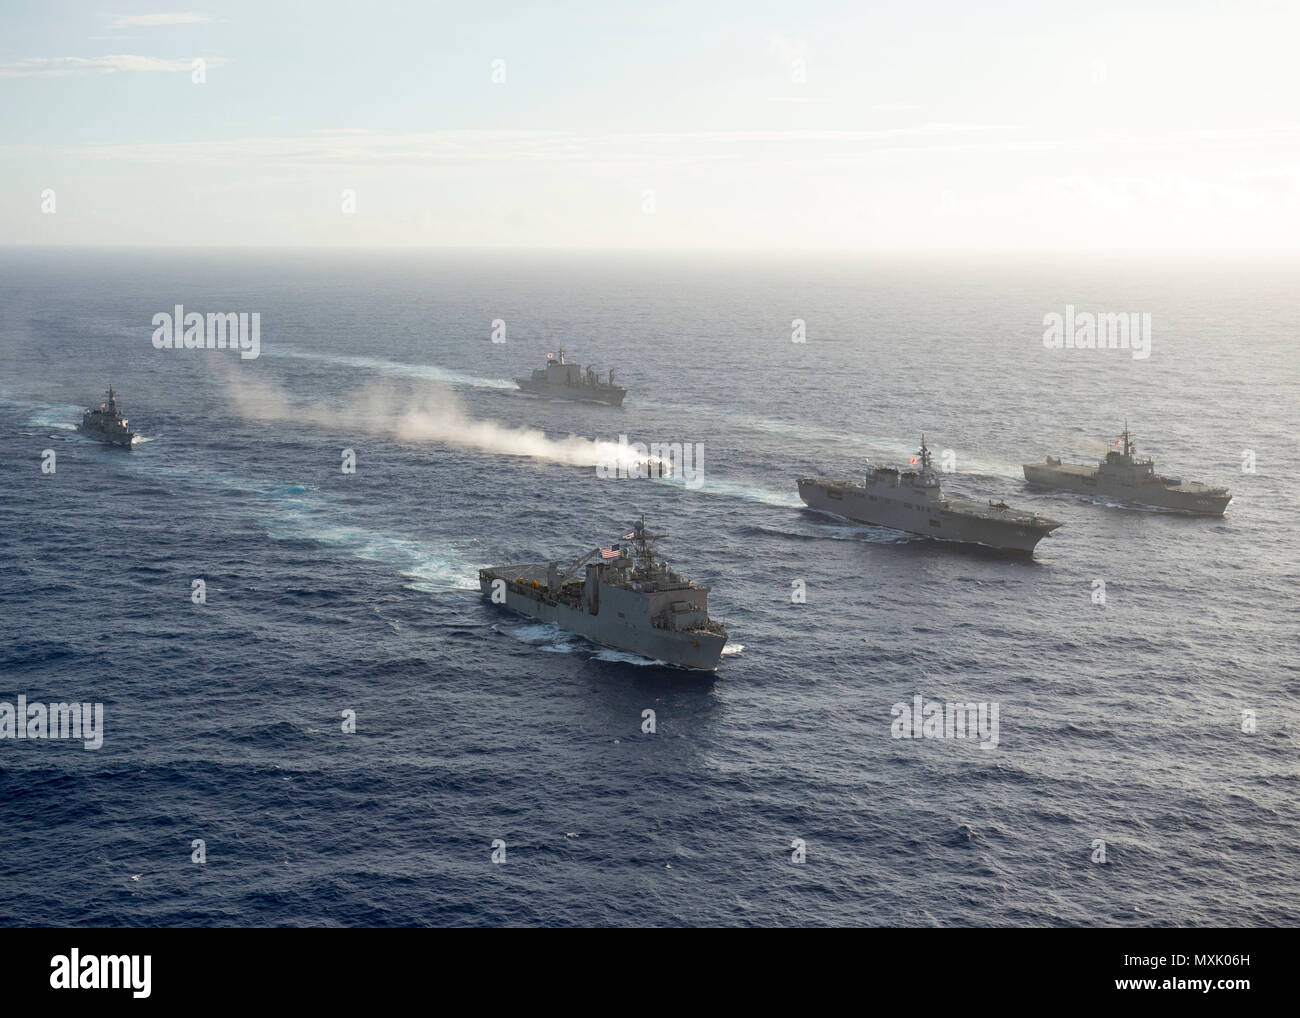 161106-N-ZK021-160 PACIFIC OCEAN (Nov. 6, 2016) - Ships participating in Keen Sword 2017 steam in formation during a photo exercise. Keen Sword 17 is a joint and bilateral field training exercise (FTX) between U.S. and Japanese forces meant to increase readiness and interoperability within the framework of the U.S. – Japan alliance. (U.S. Navy photo by Petty Officer First Class Nardel Gervacio/Released) Stock Photo